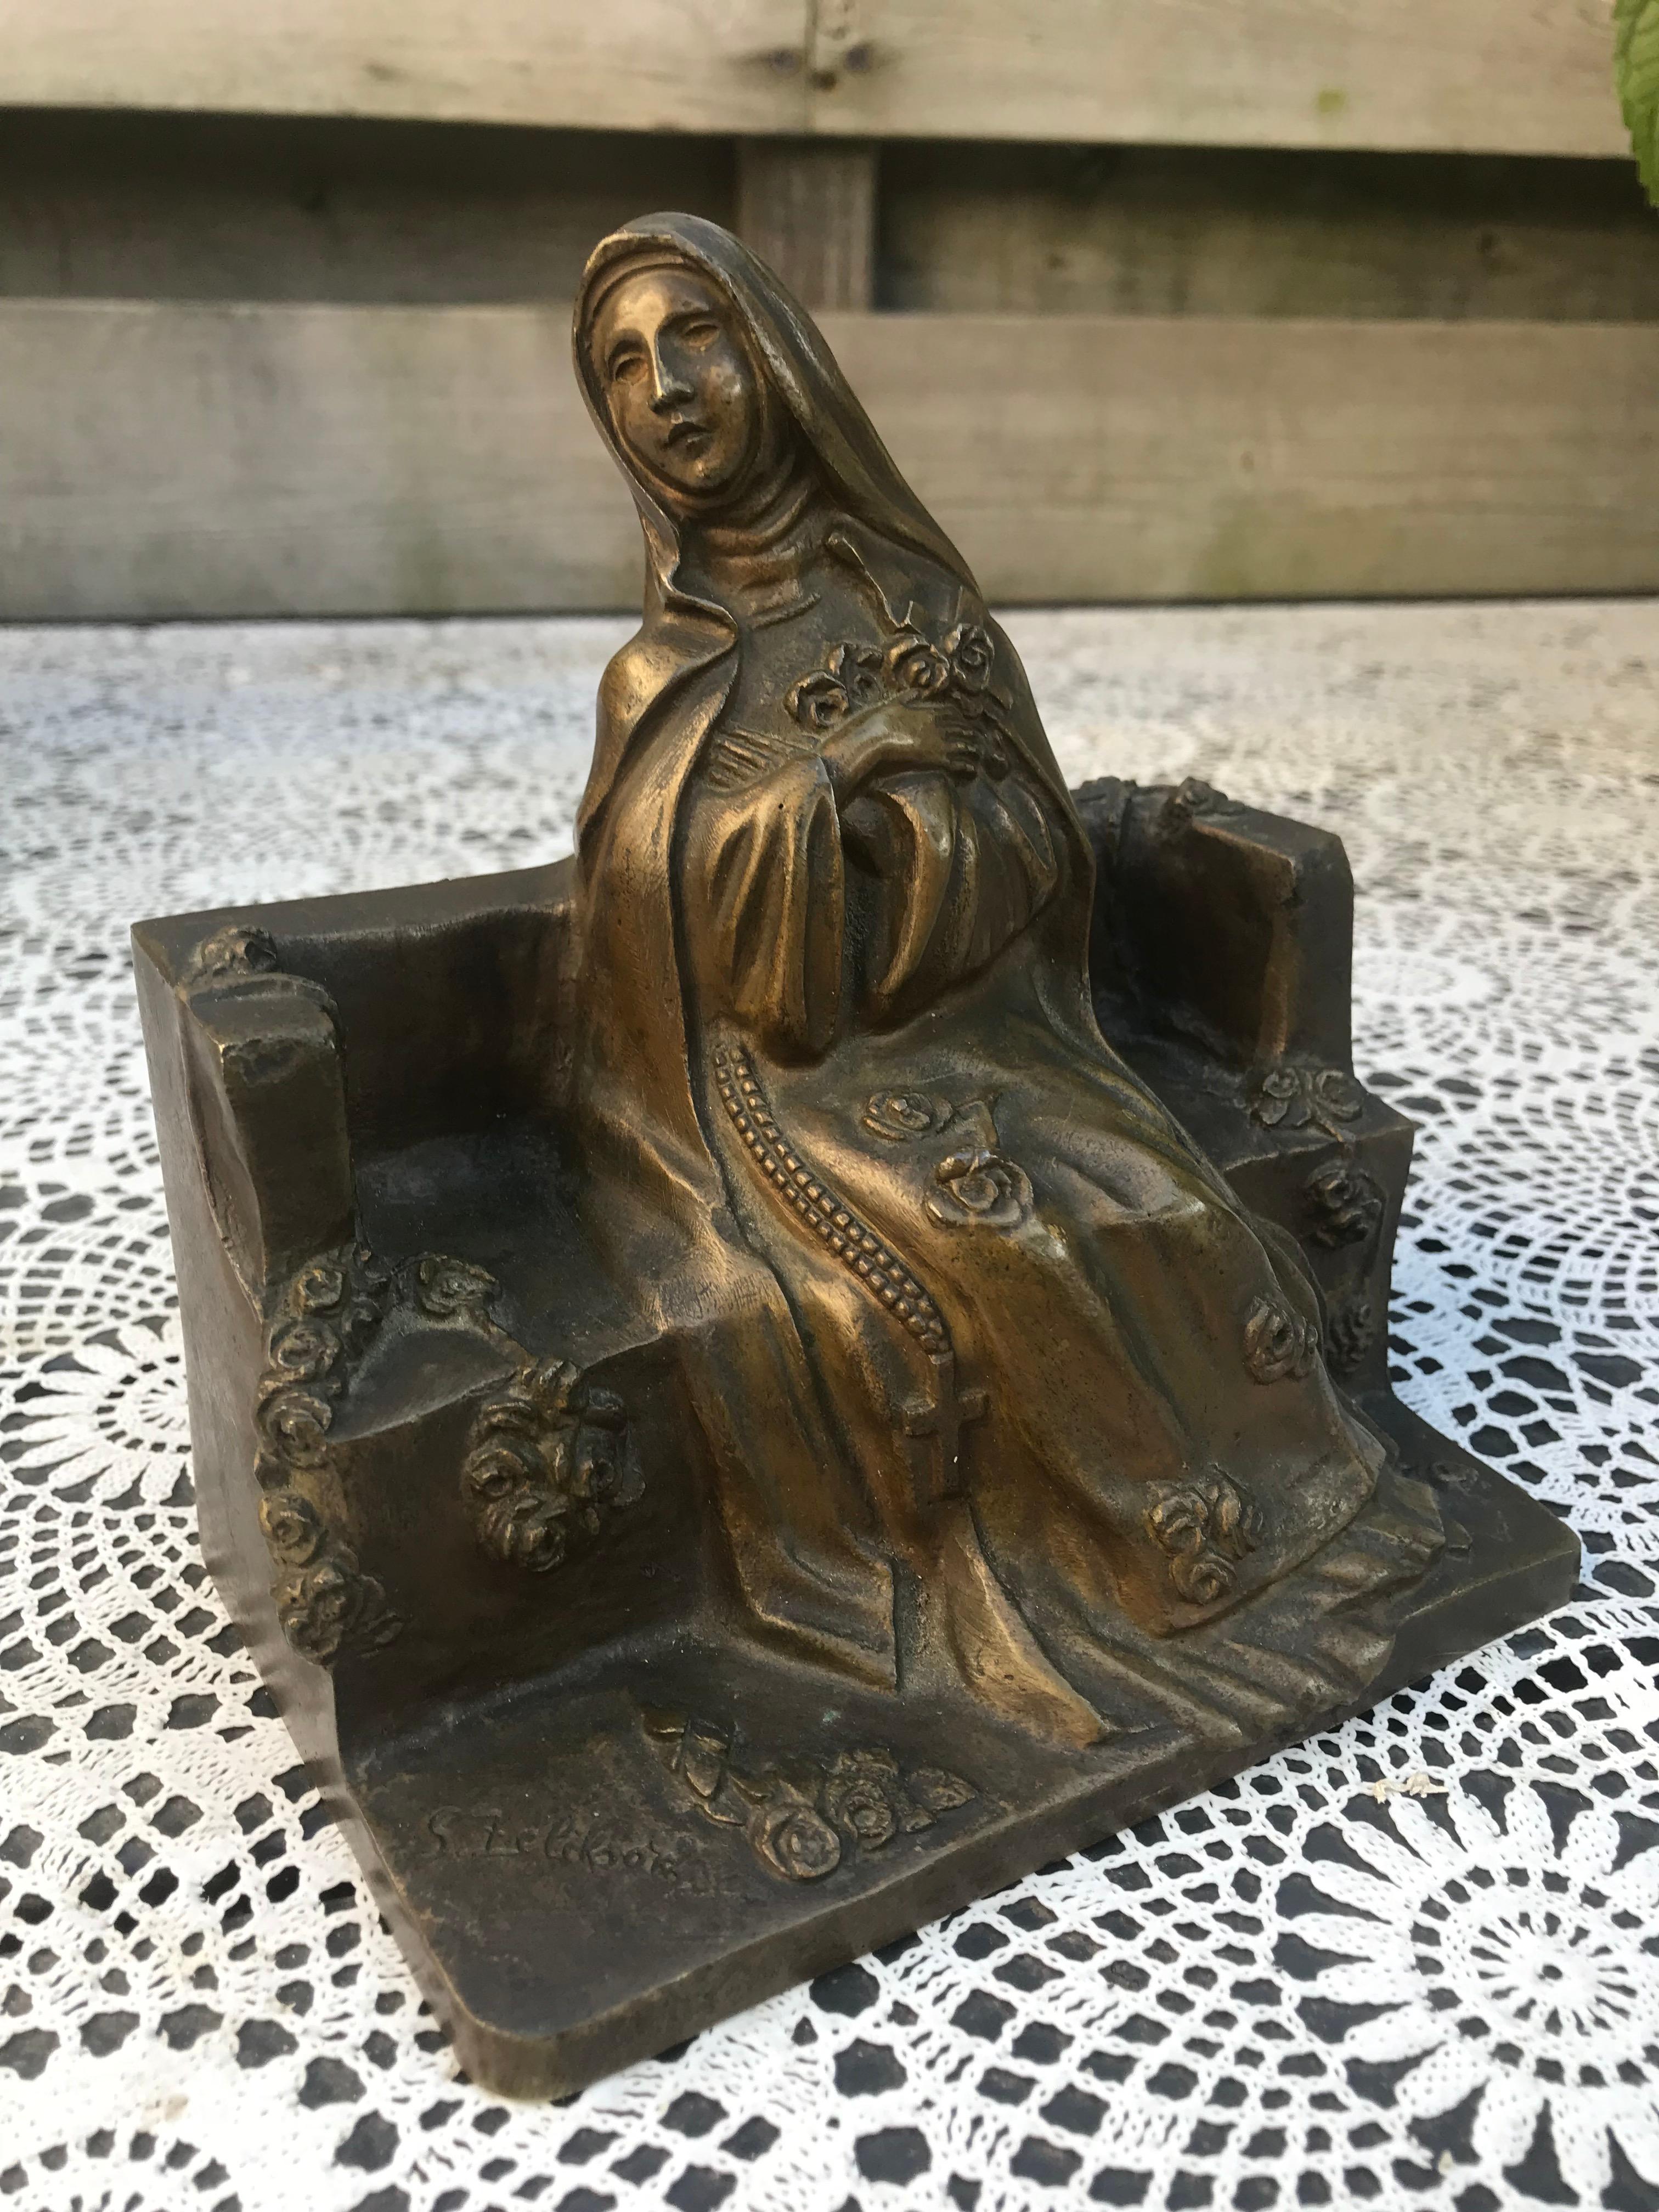 Hand-Crafted Antique Bronze Sculpture of Saint Theresia of Lisieux by Russian Serge Zelikson